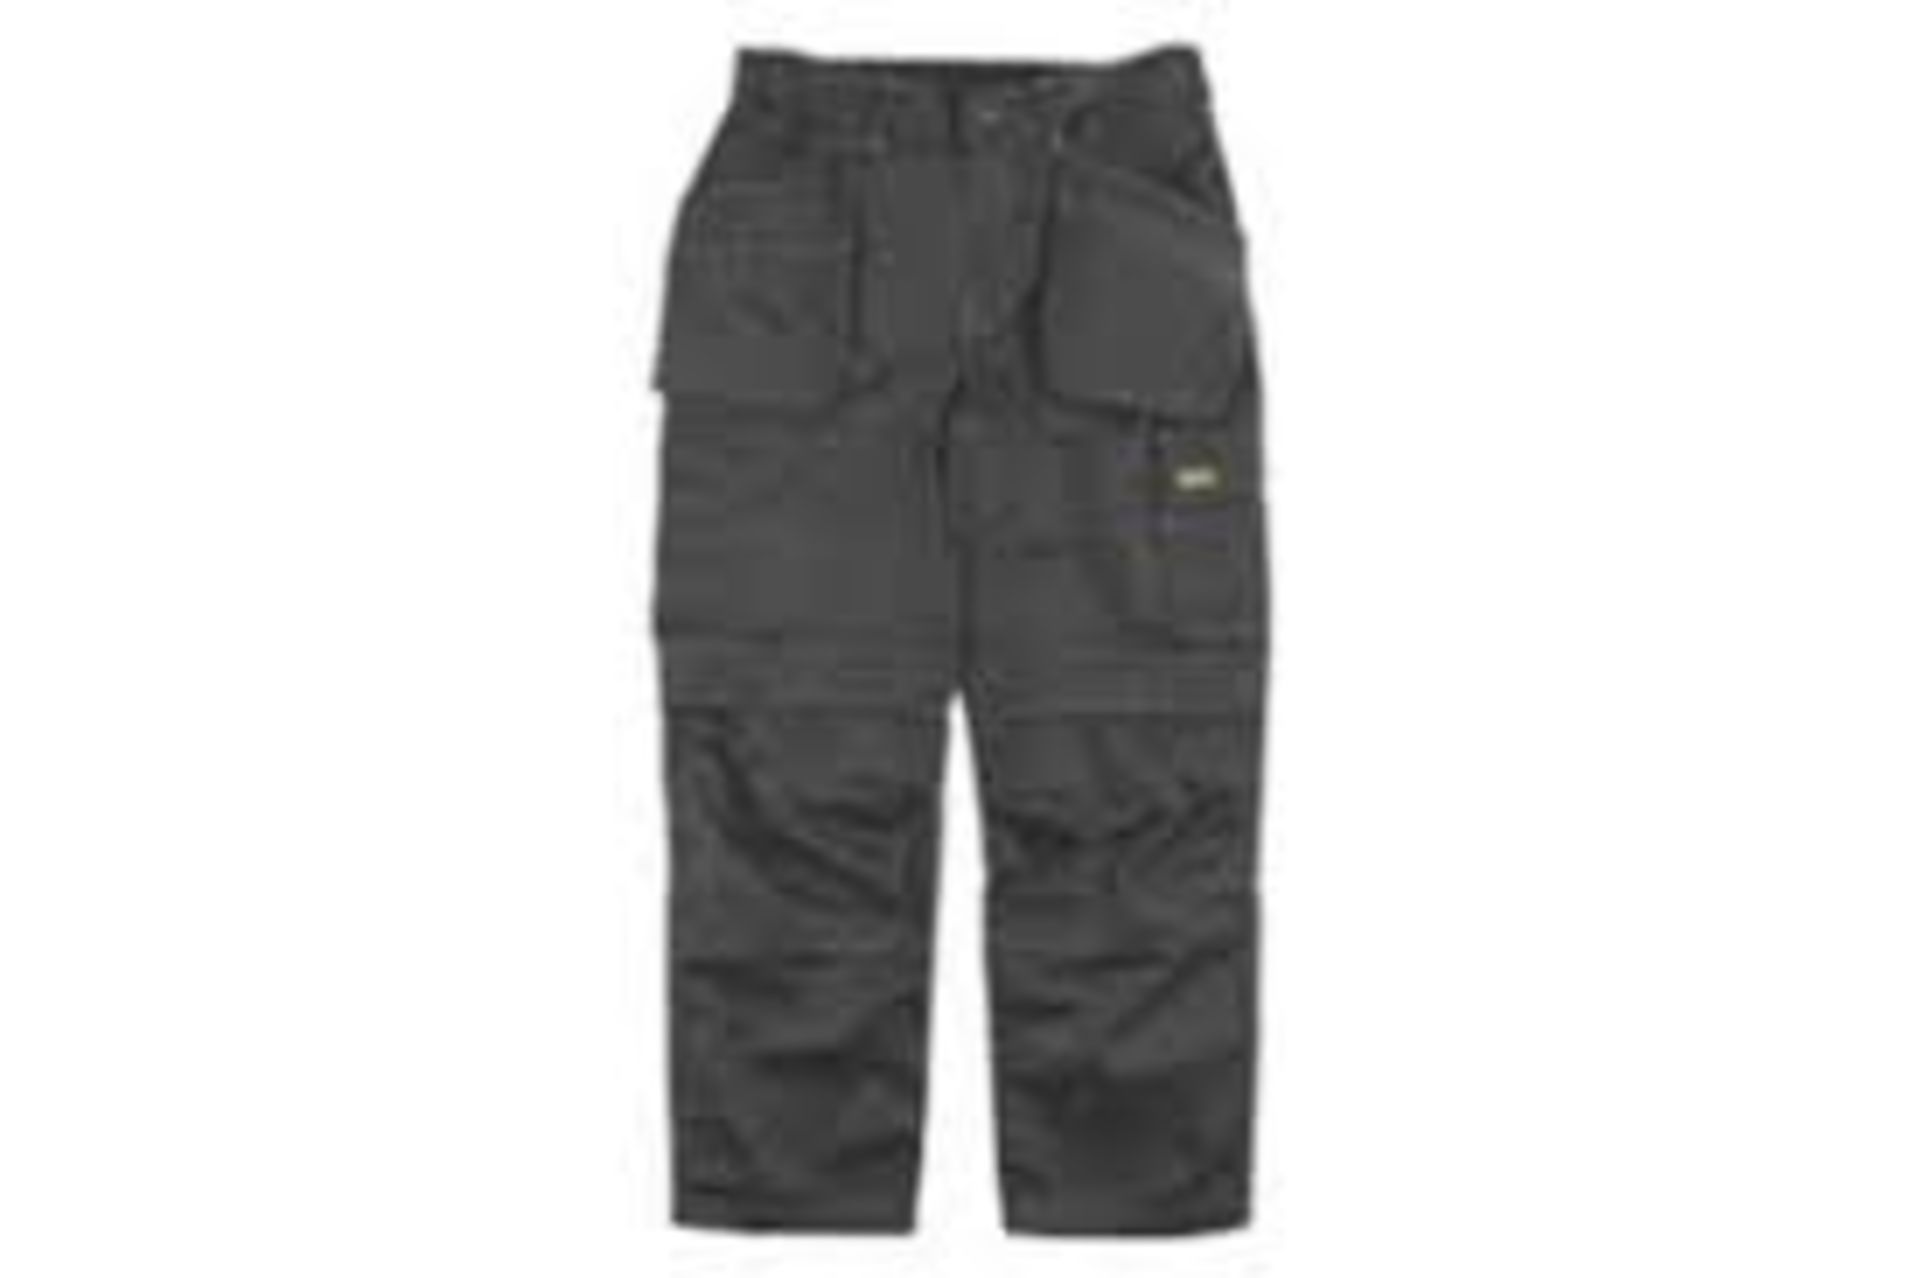 3 X NEW PACKAGED PAIRS OF SITE FOX TROUSERS BLACK. (ROW4MID) Polycotton trousers with top-loading